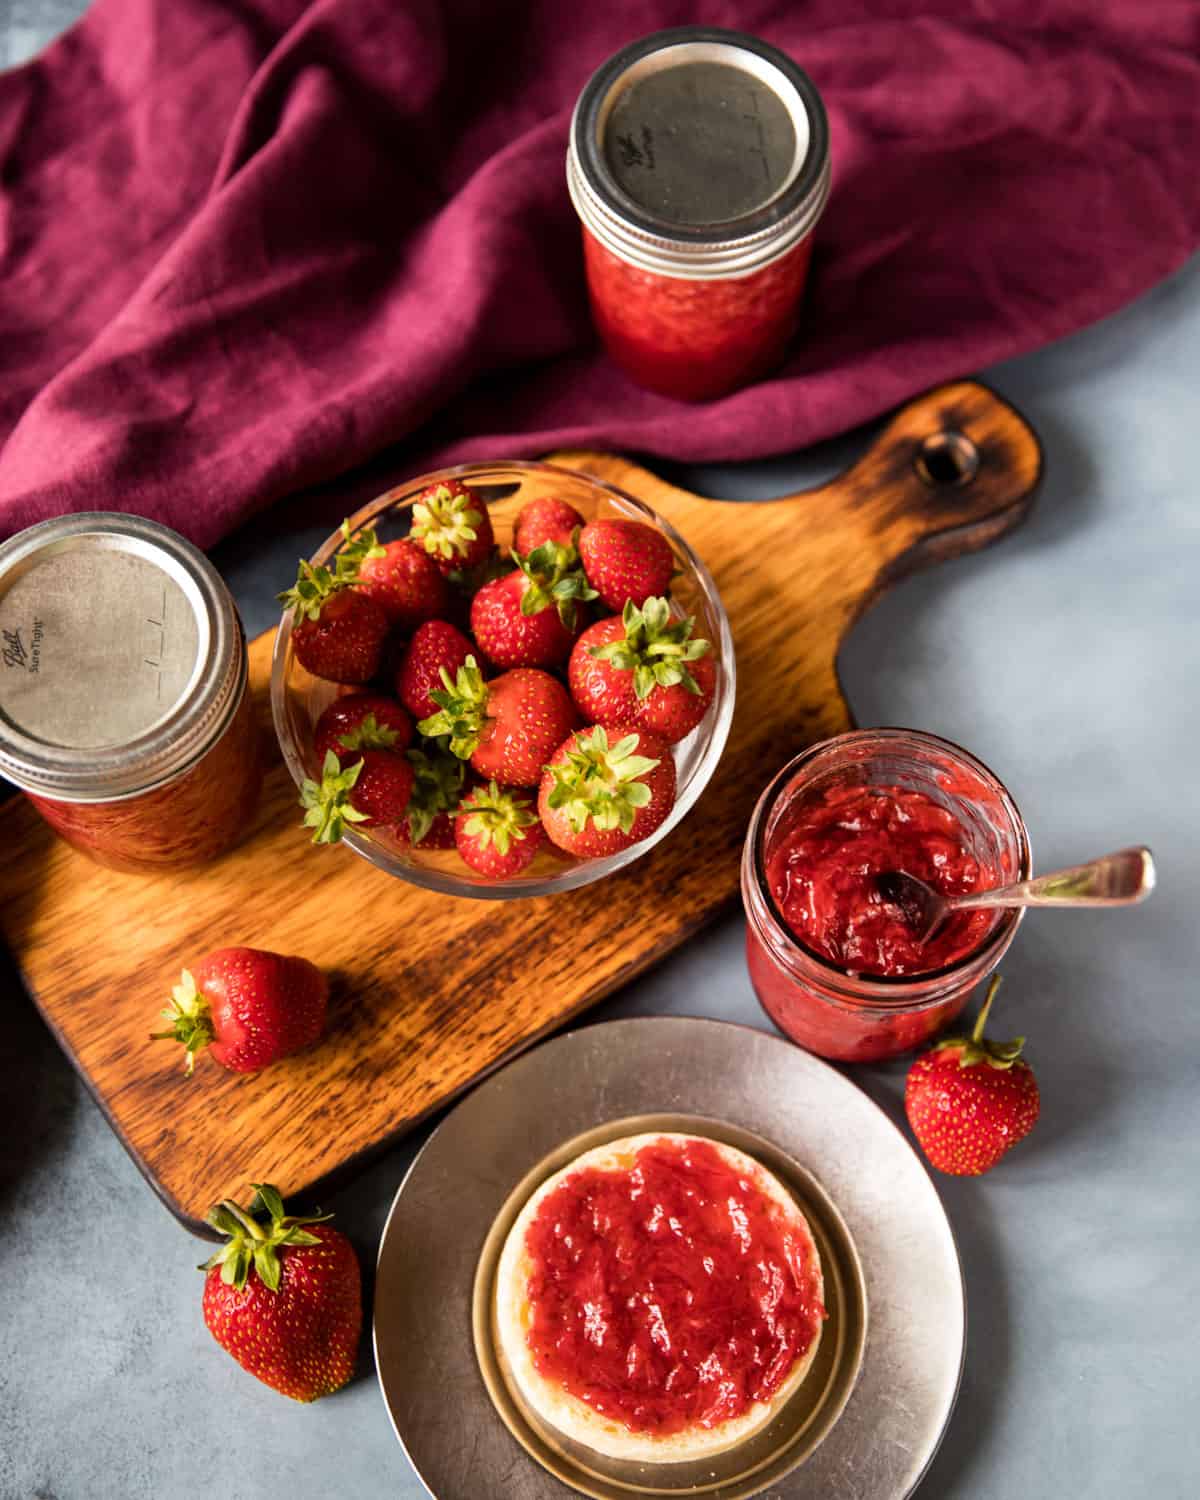 A bowl of fresh strawberries, a jar of opened strawberry jam with a spoon on a wooden cutting board. Surrounded by burgundy fabric and a plate with jam covered toast. 